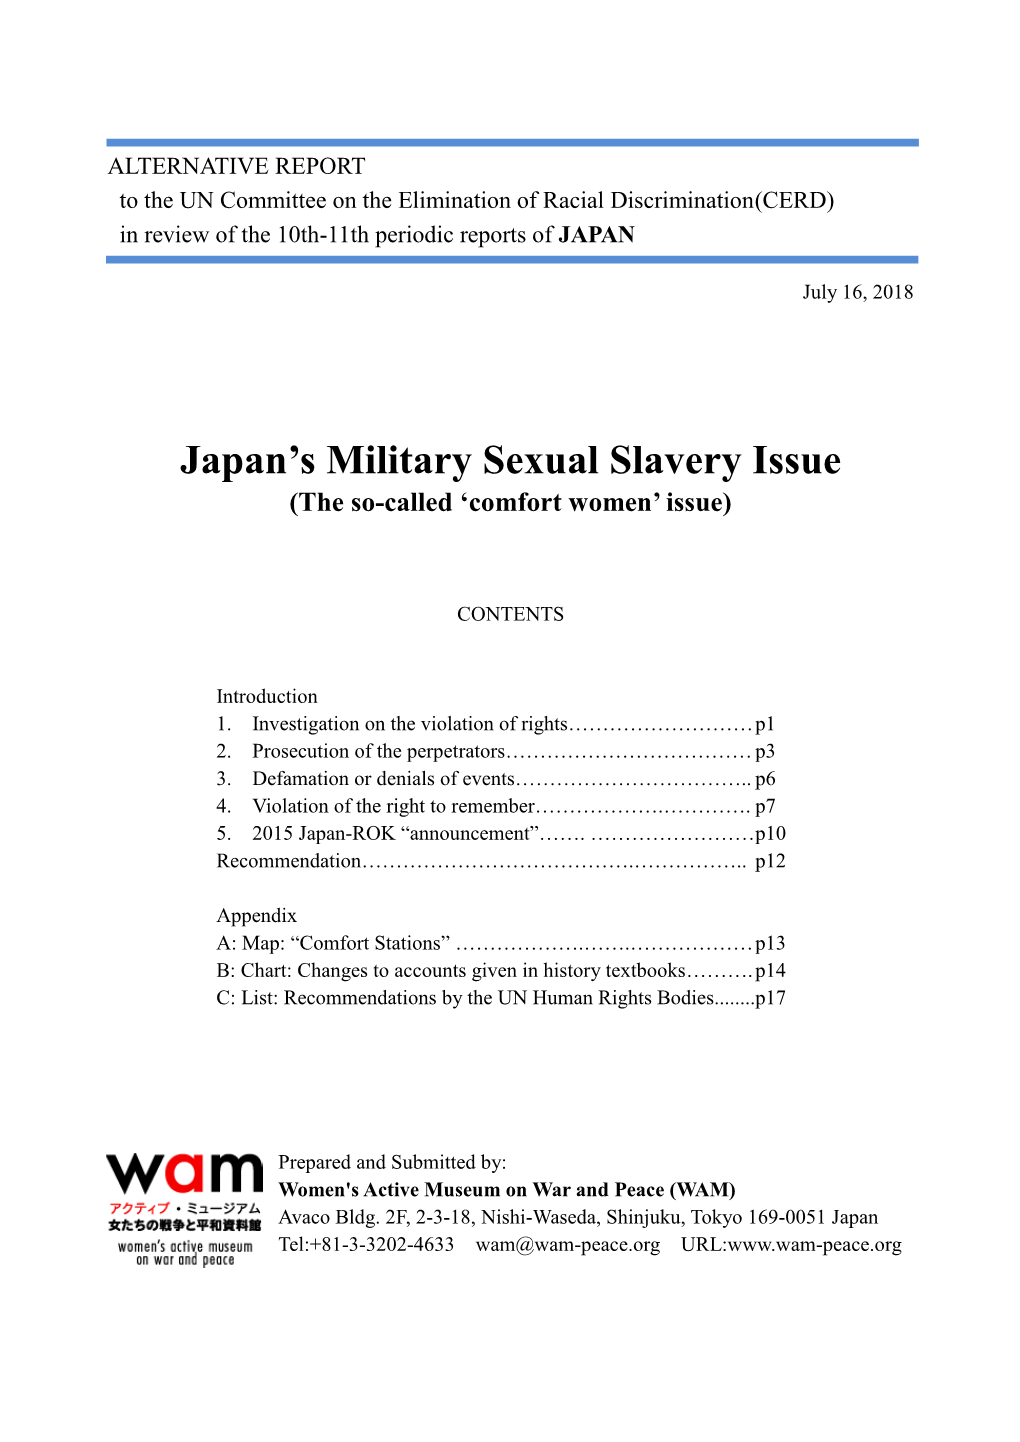 Japan's Military Sexual Slavery Issue